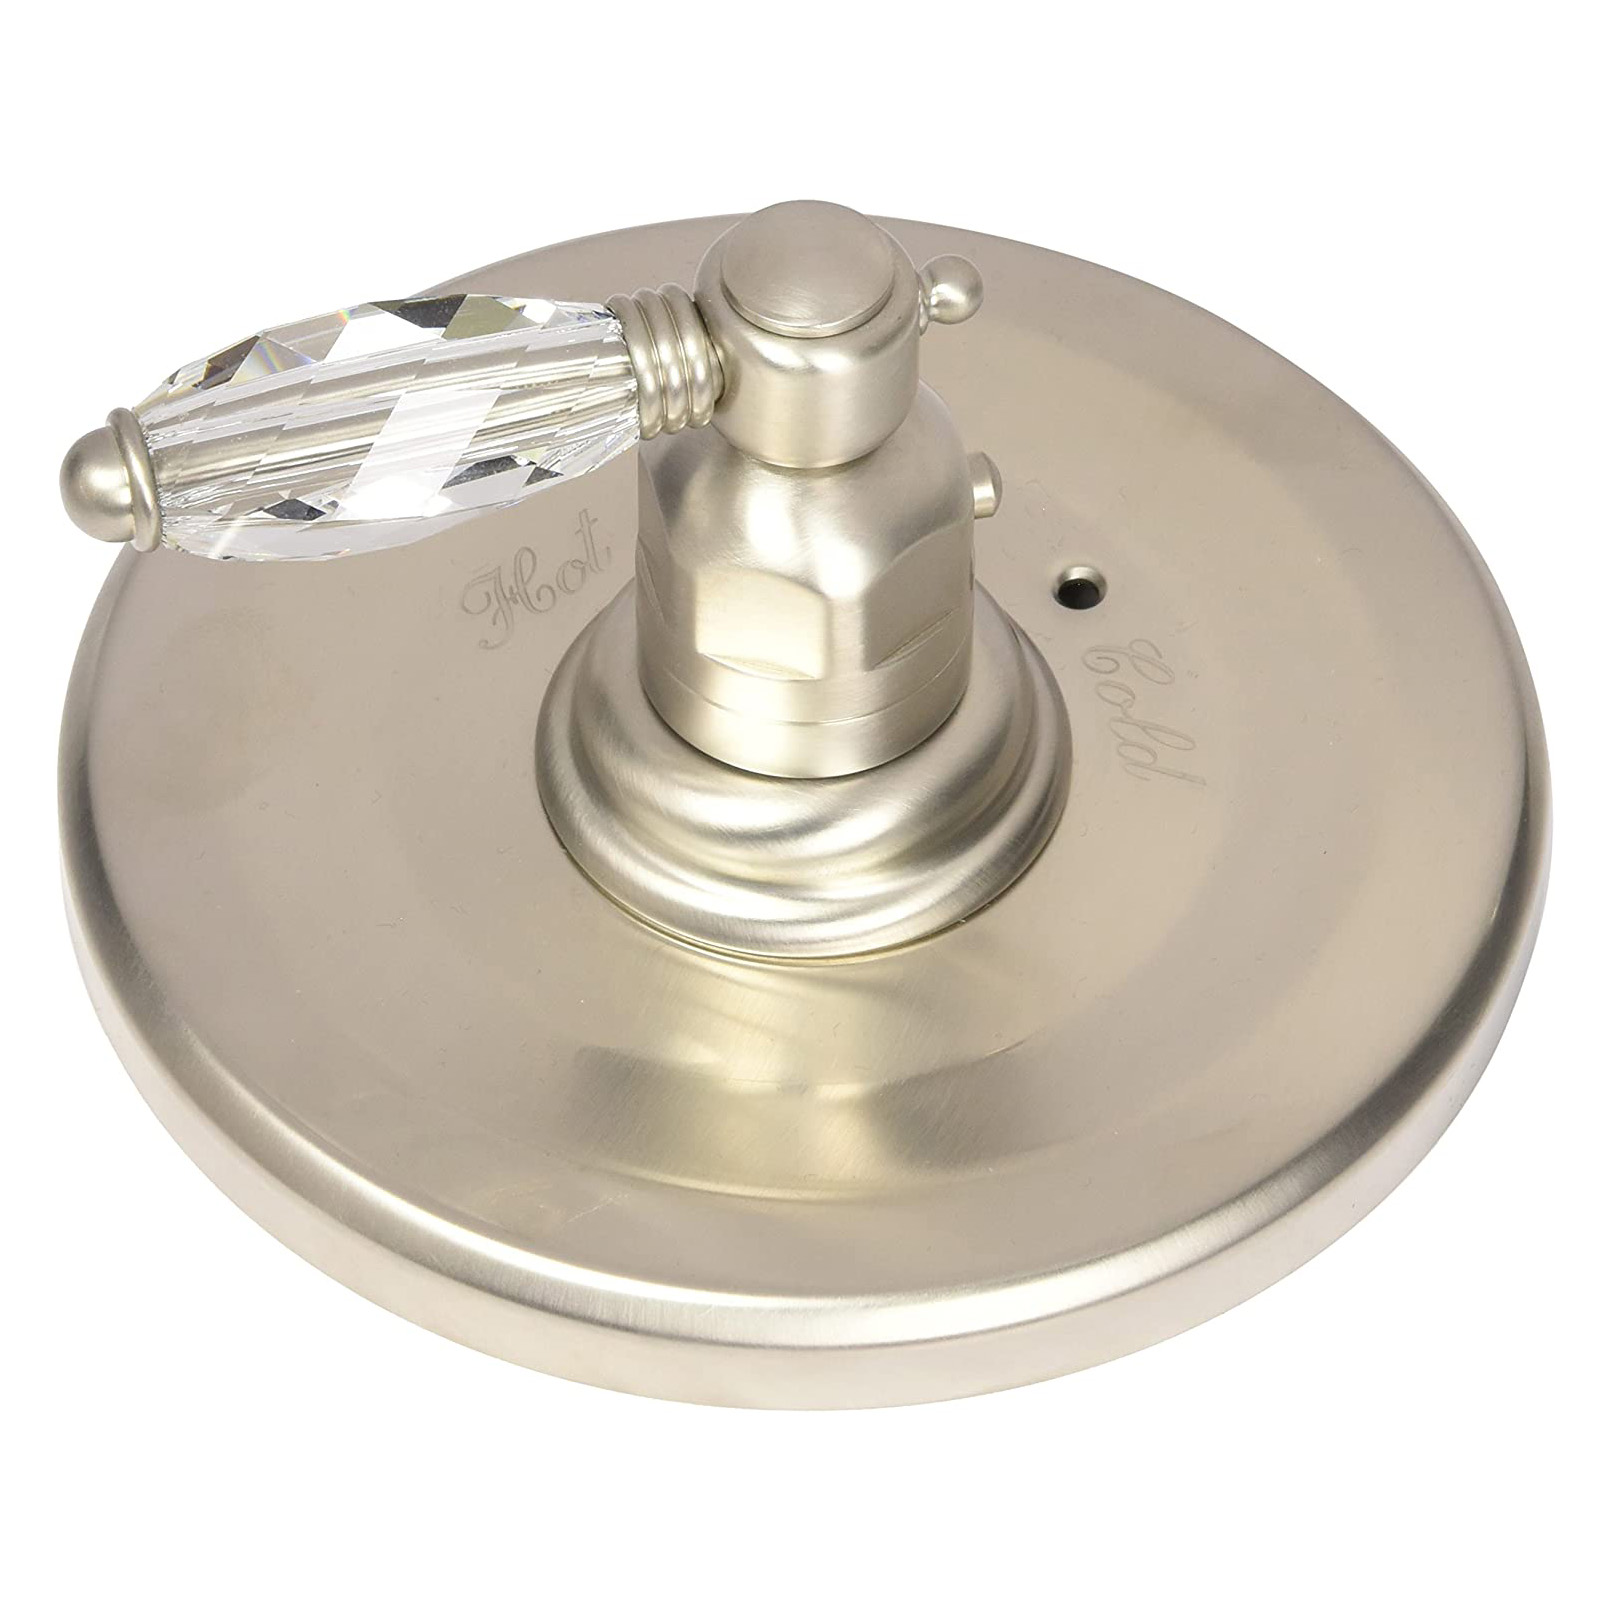 Country Bath Trim Plate In Satin Nickel